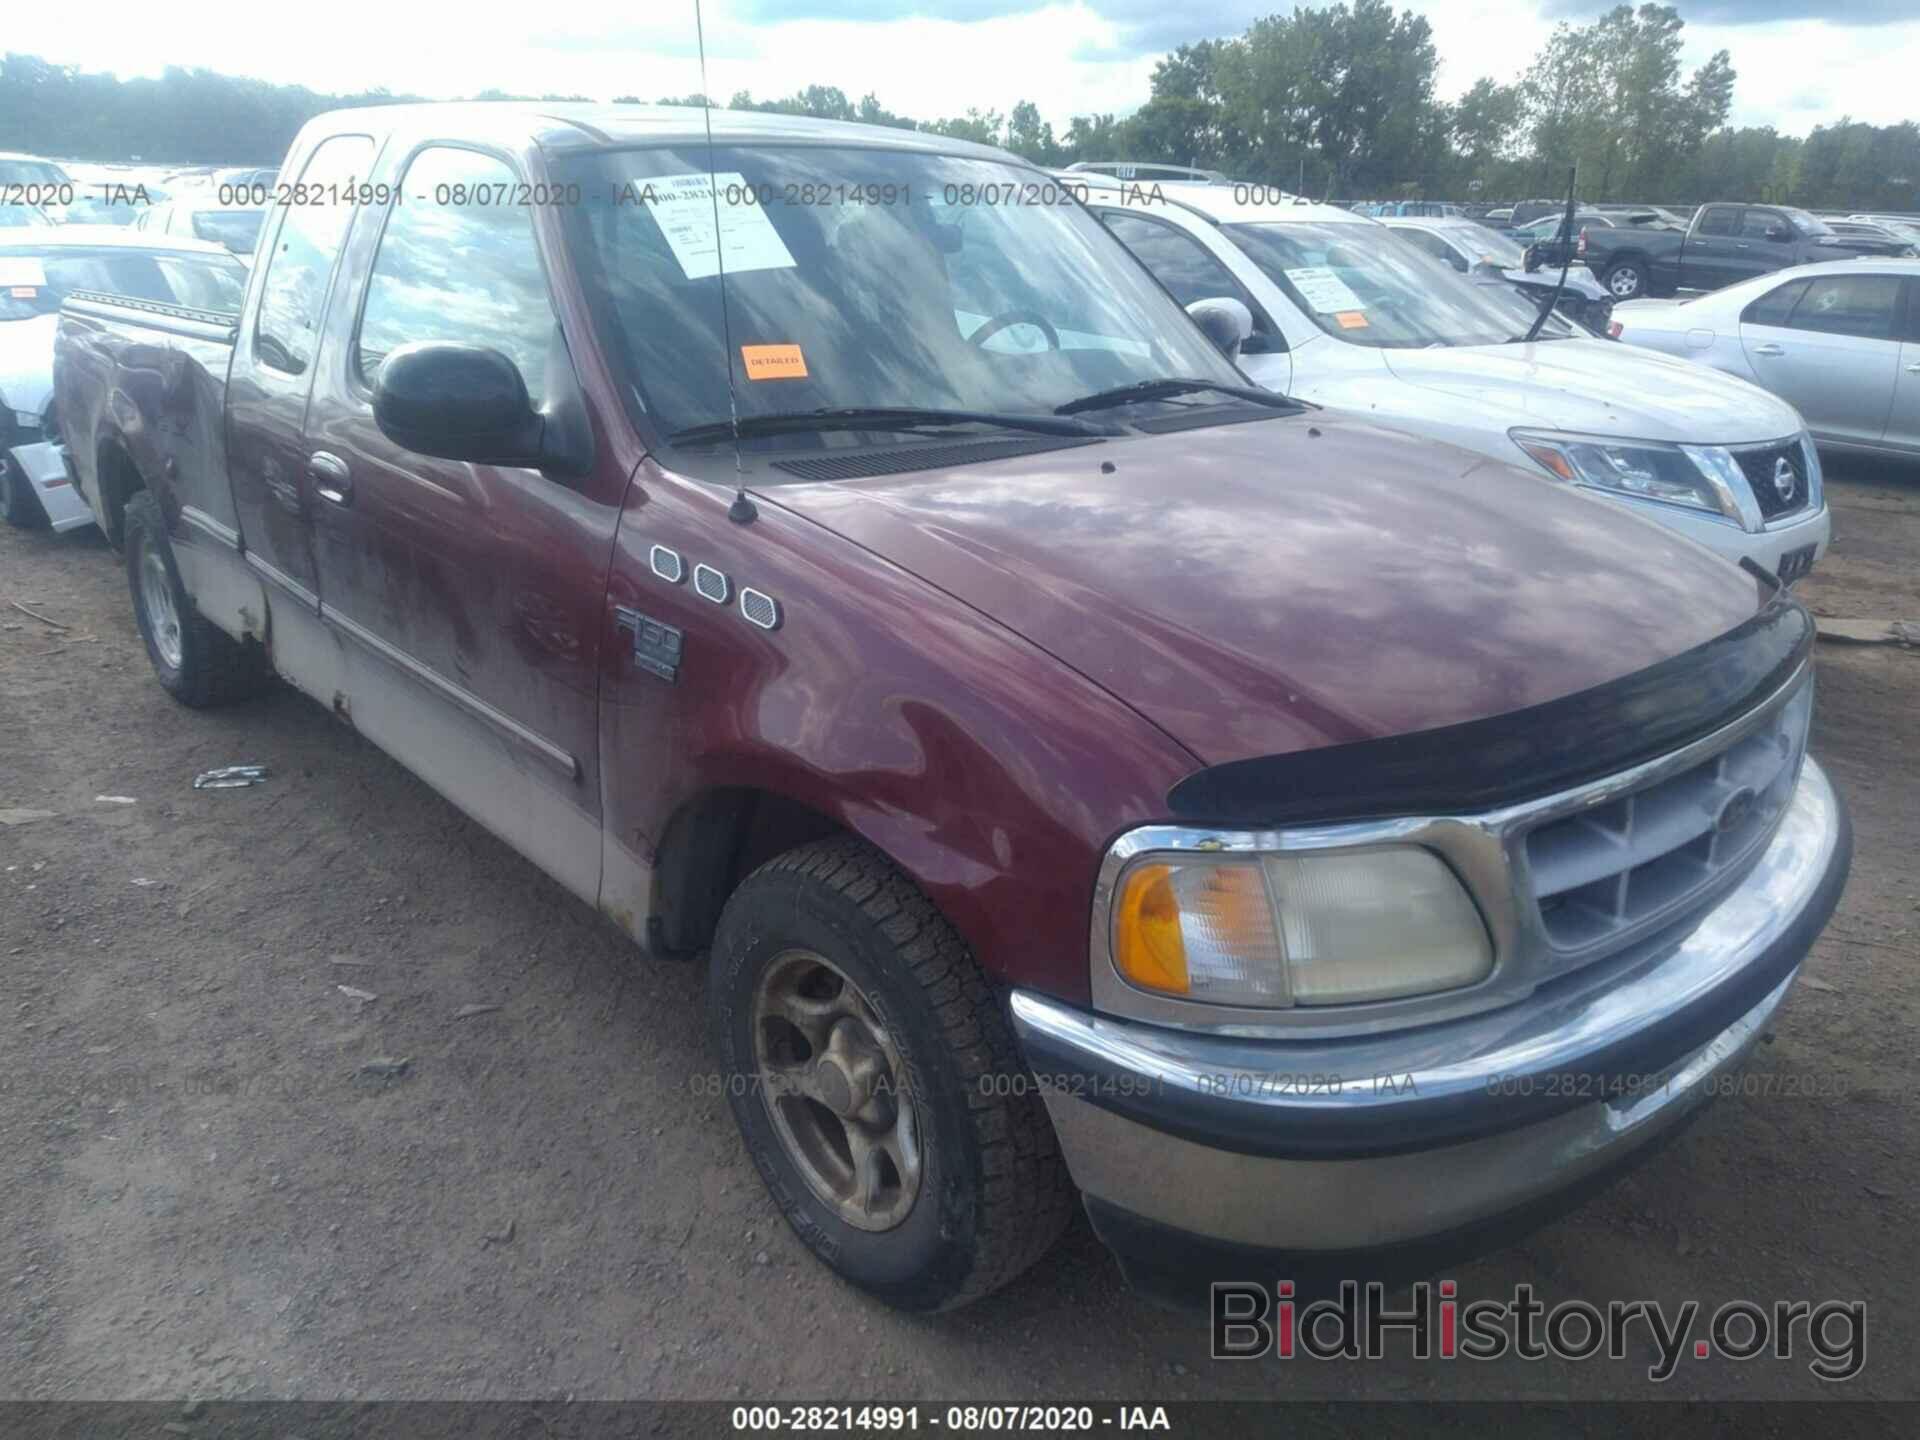 Photo 2FTZX1760WCA45105 - FORD F-150 1998